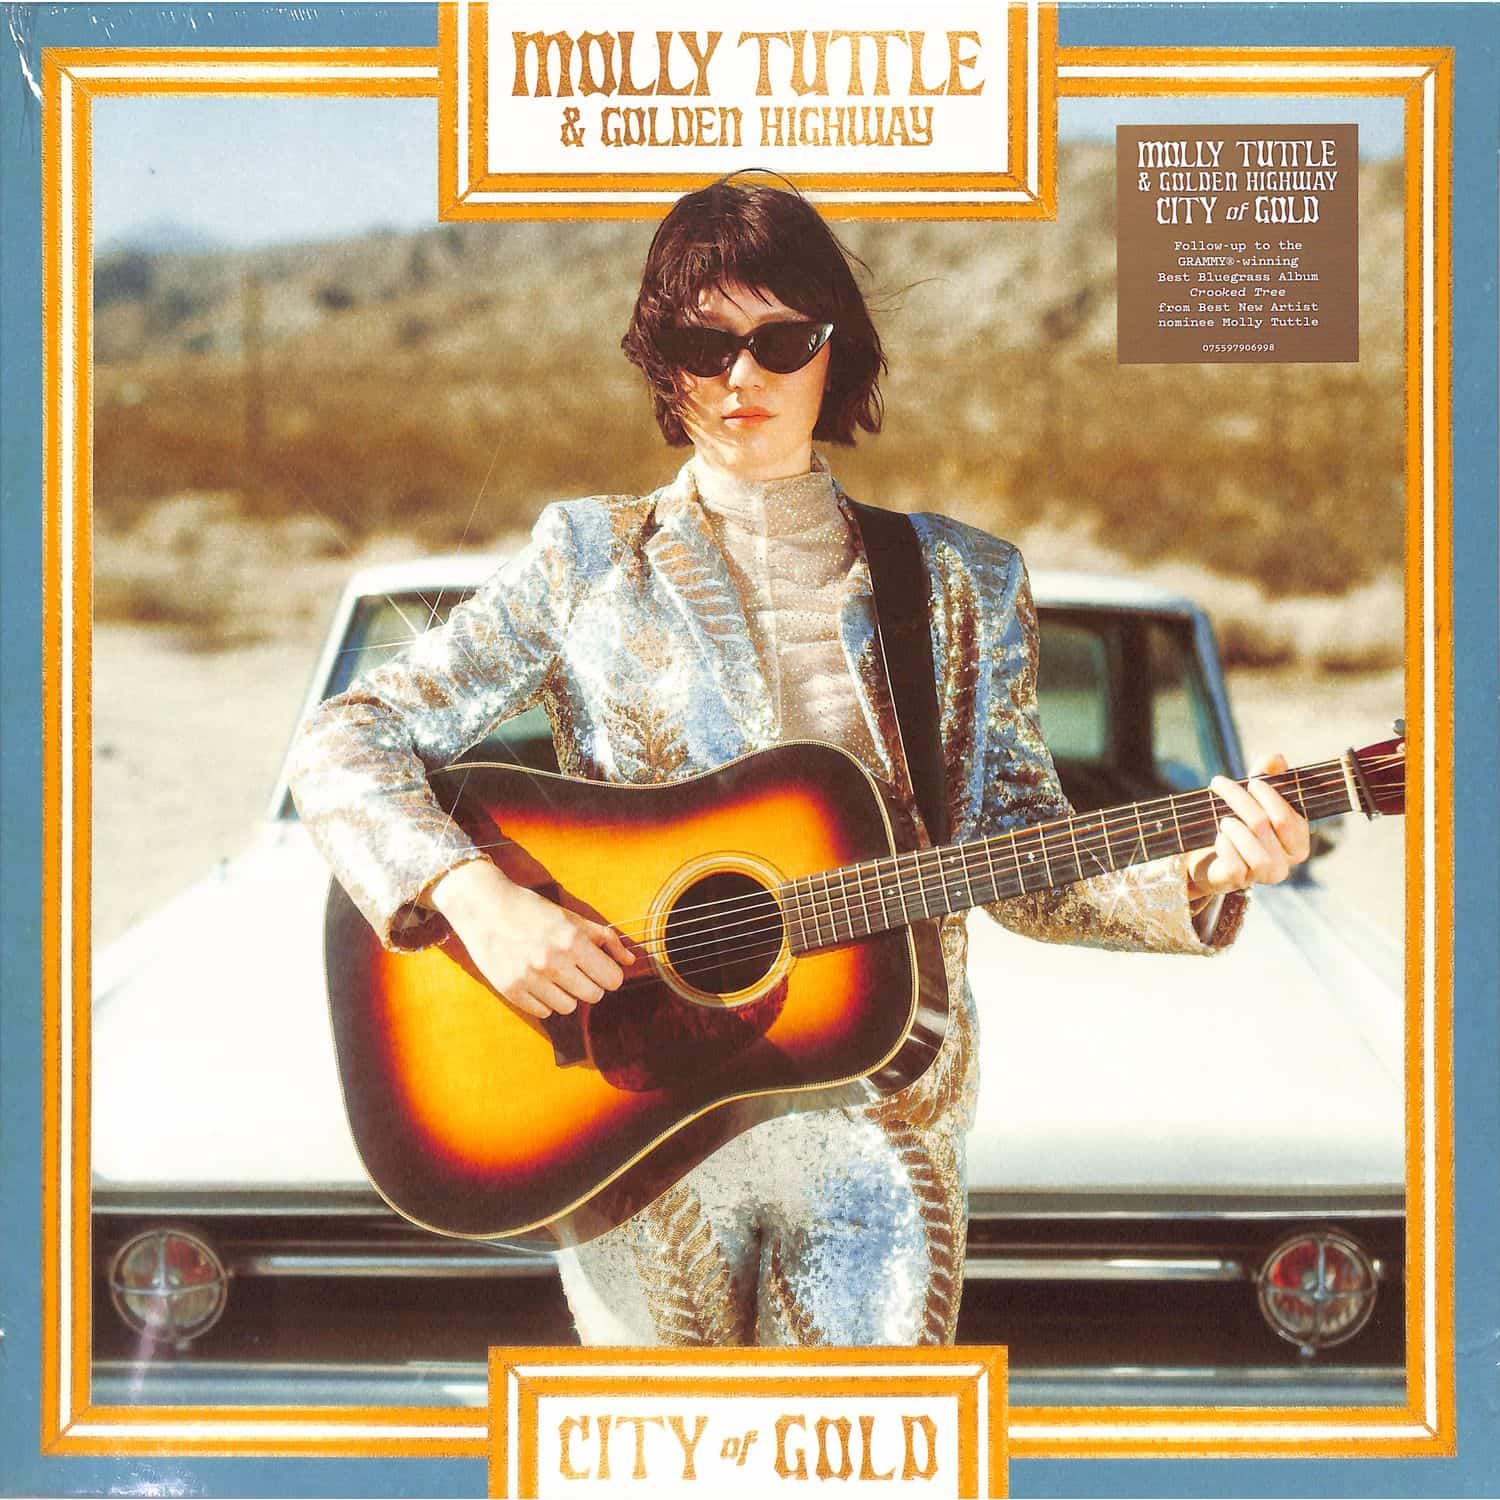 Molly Tuttle & Golden Highway - CITY OF GOLD 